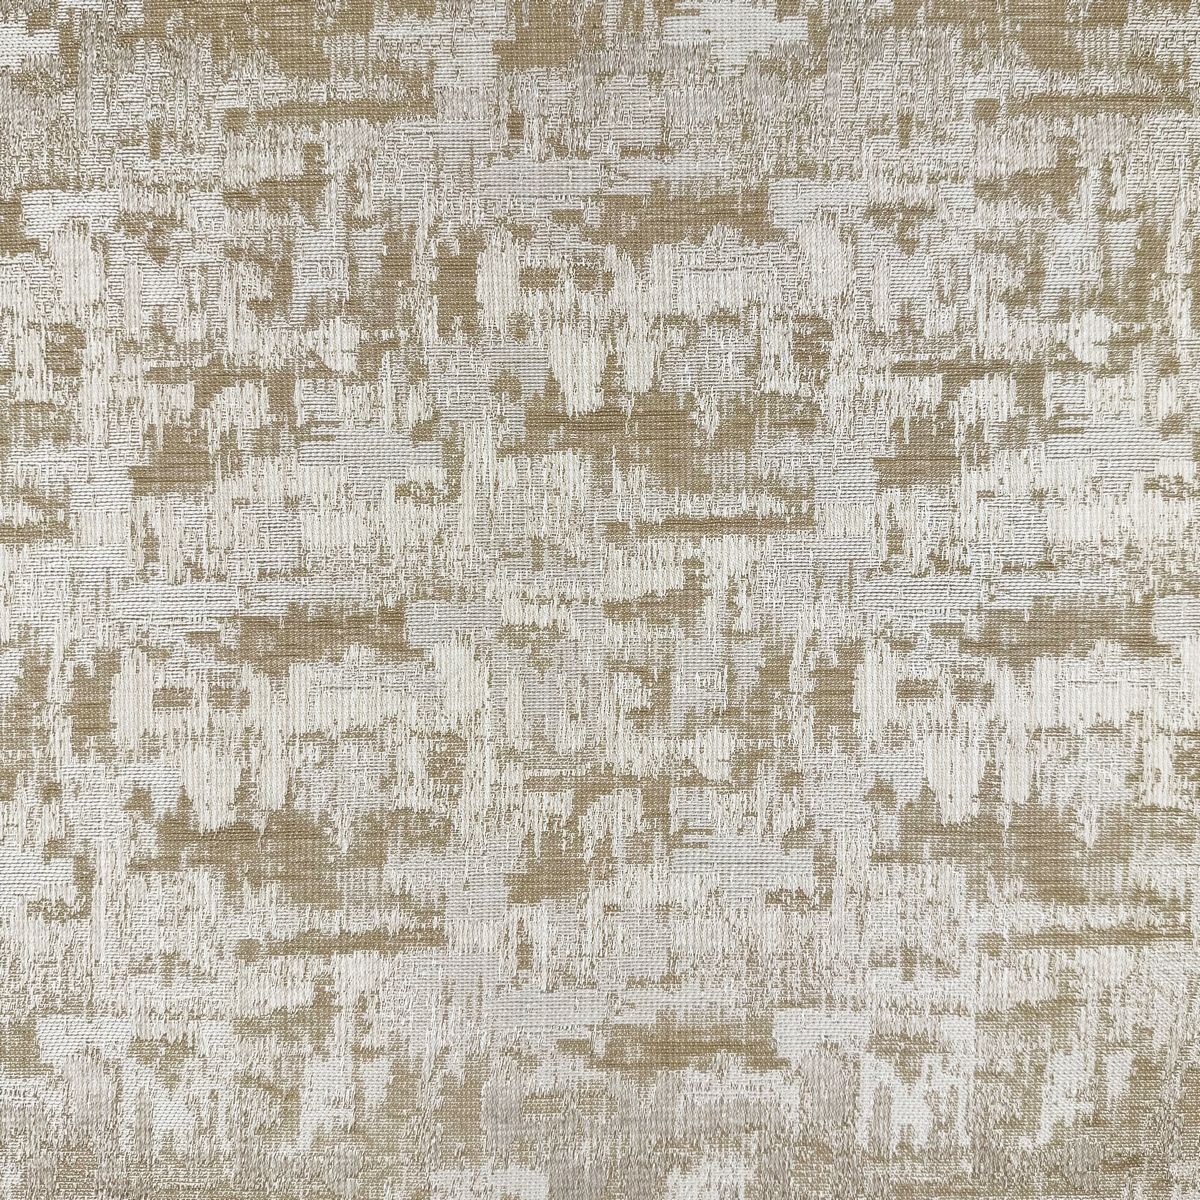 Cranbourne Latte Fabric by Chatham Glyn